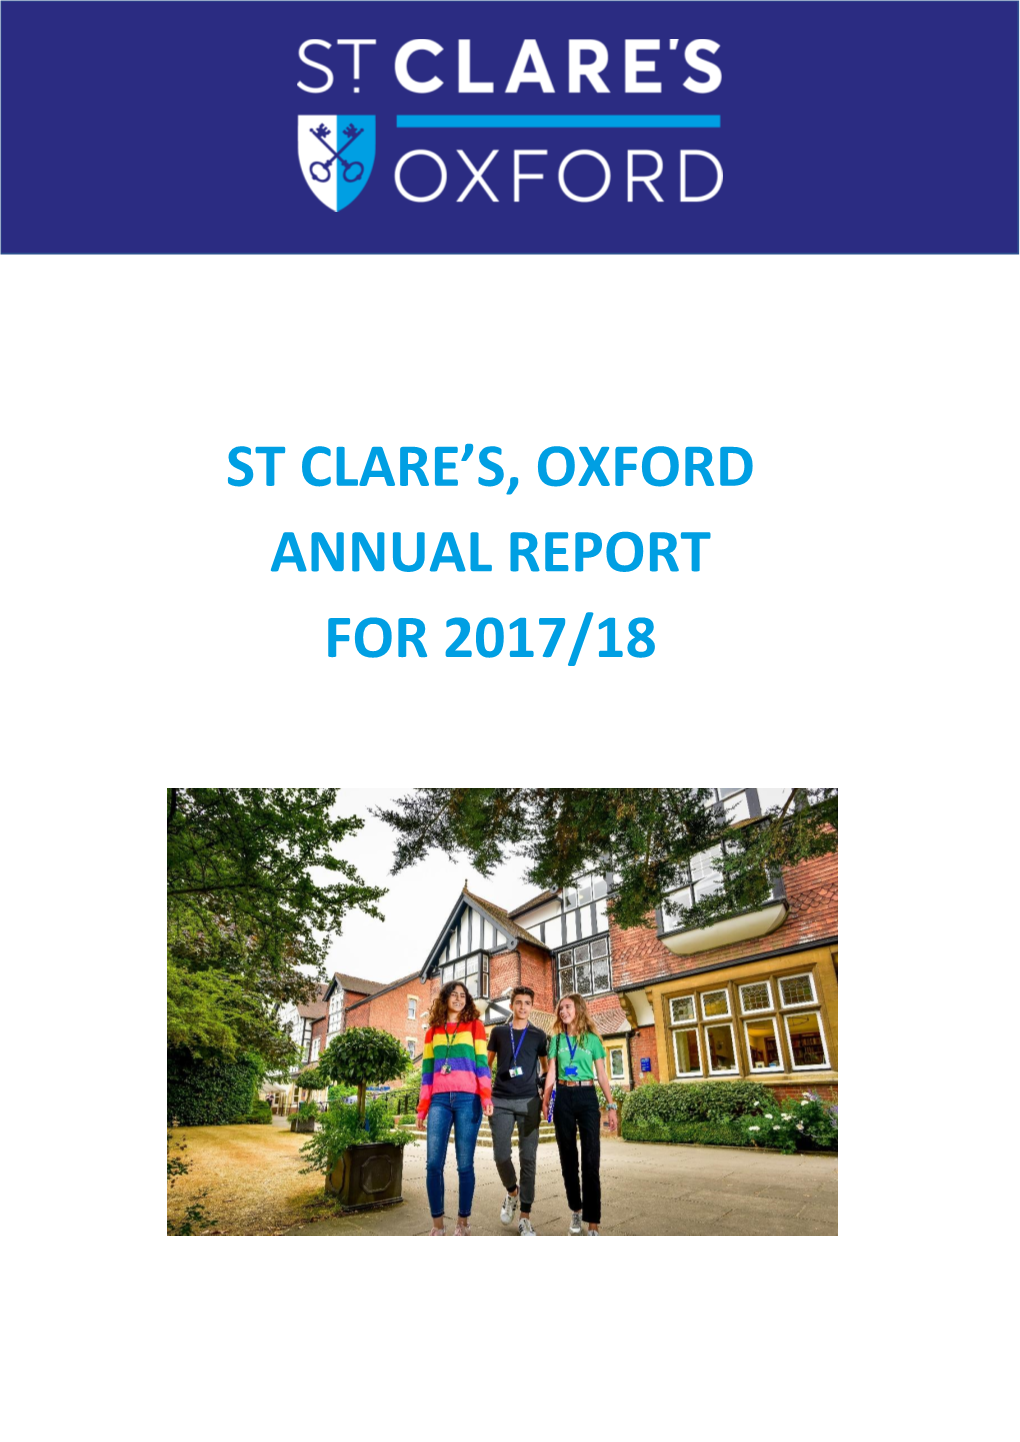 St Clare's, Oxford Annual Report for 2017/18